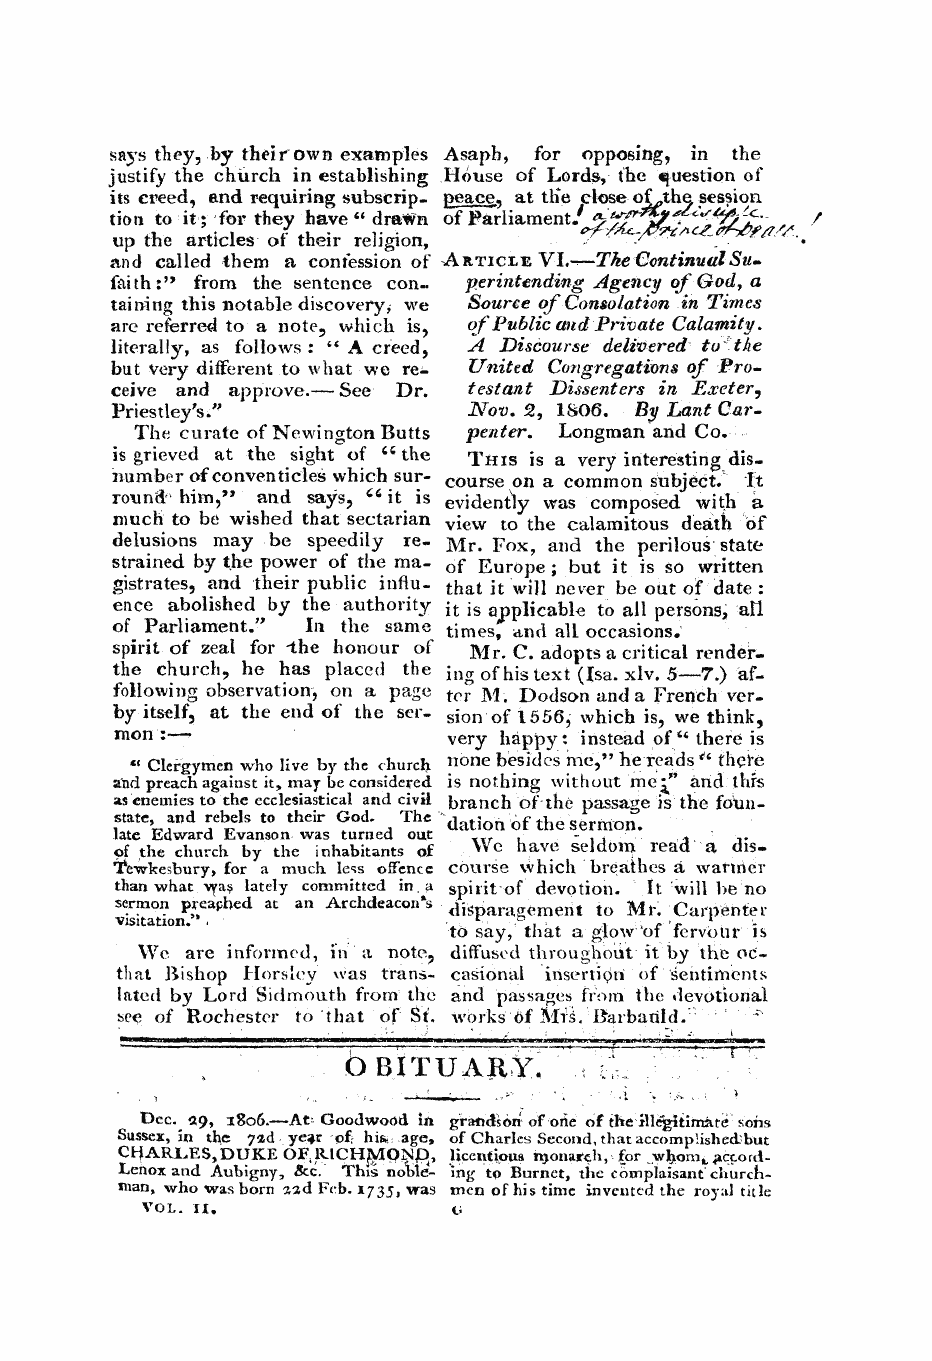 Monthly Repository (1806-1838) and Unitarian Chronicle (1832-1833): F Y, 1st edition - Obituary. I ",